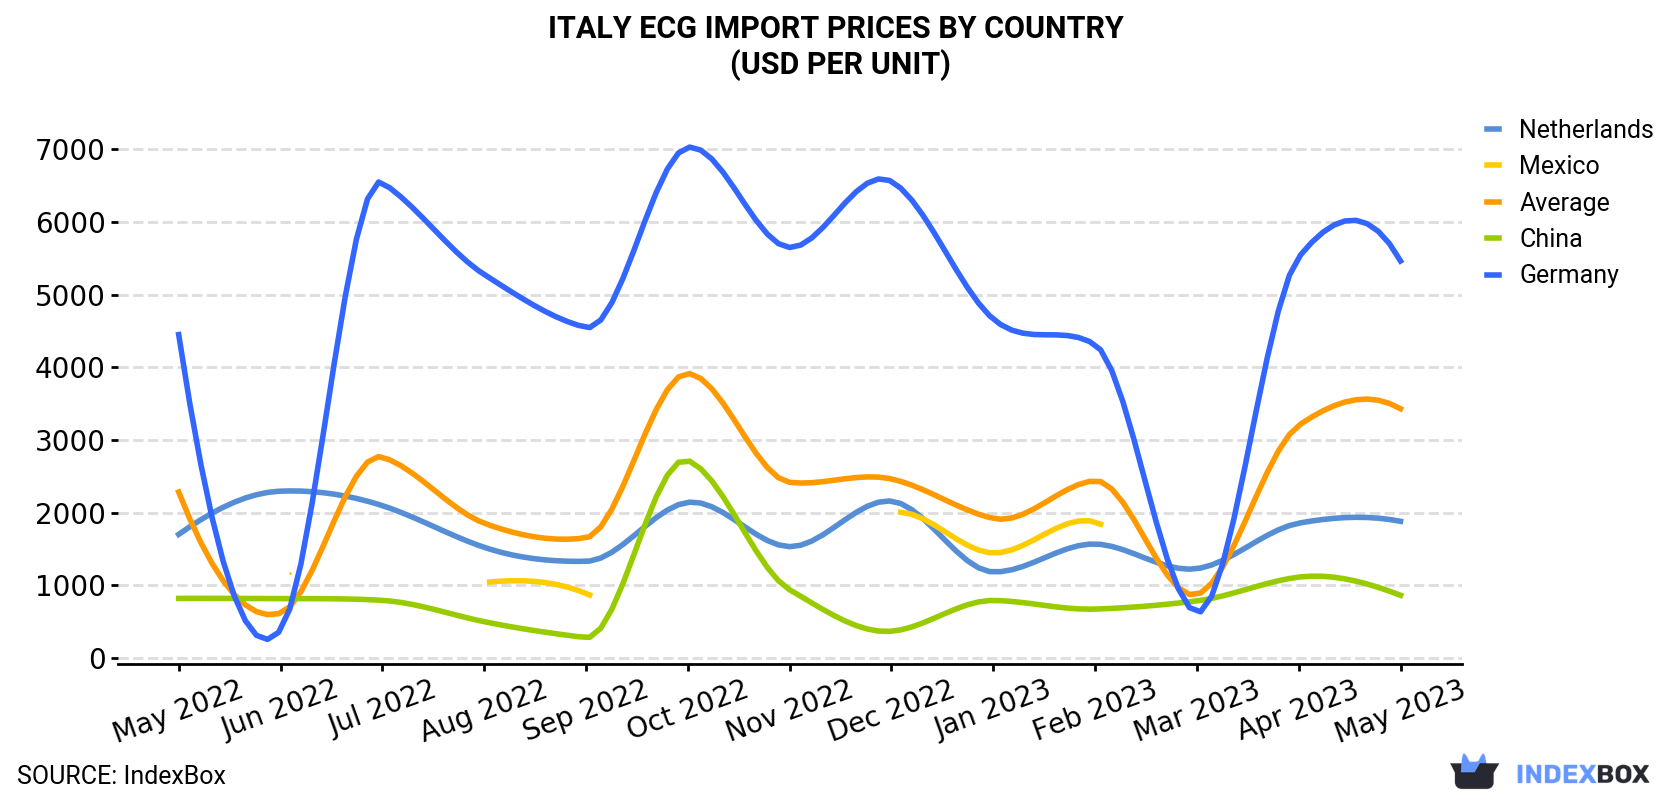 Italy ECG Import Prices By Country (USD Per Unit)